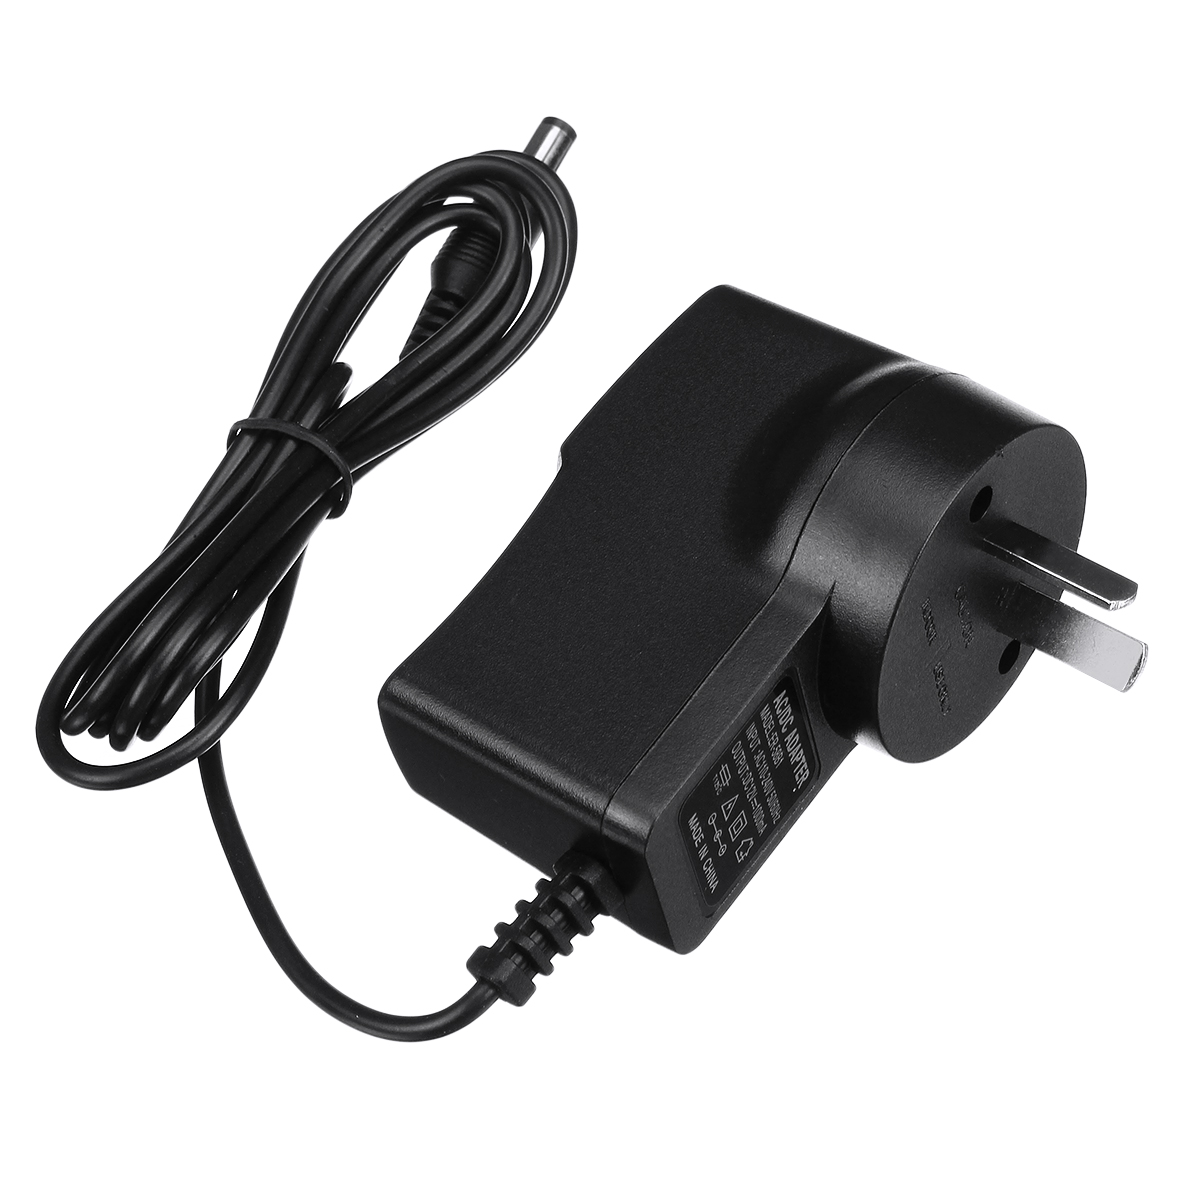 

12V 1000mA Battery Charger For Kid Electric Ride On Car Bike Scooter Buggy Quad